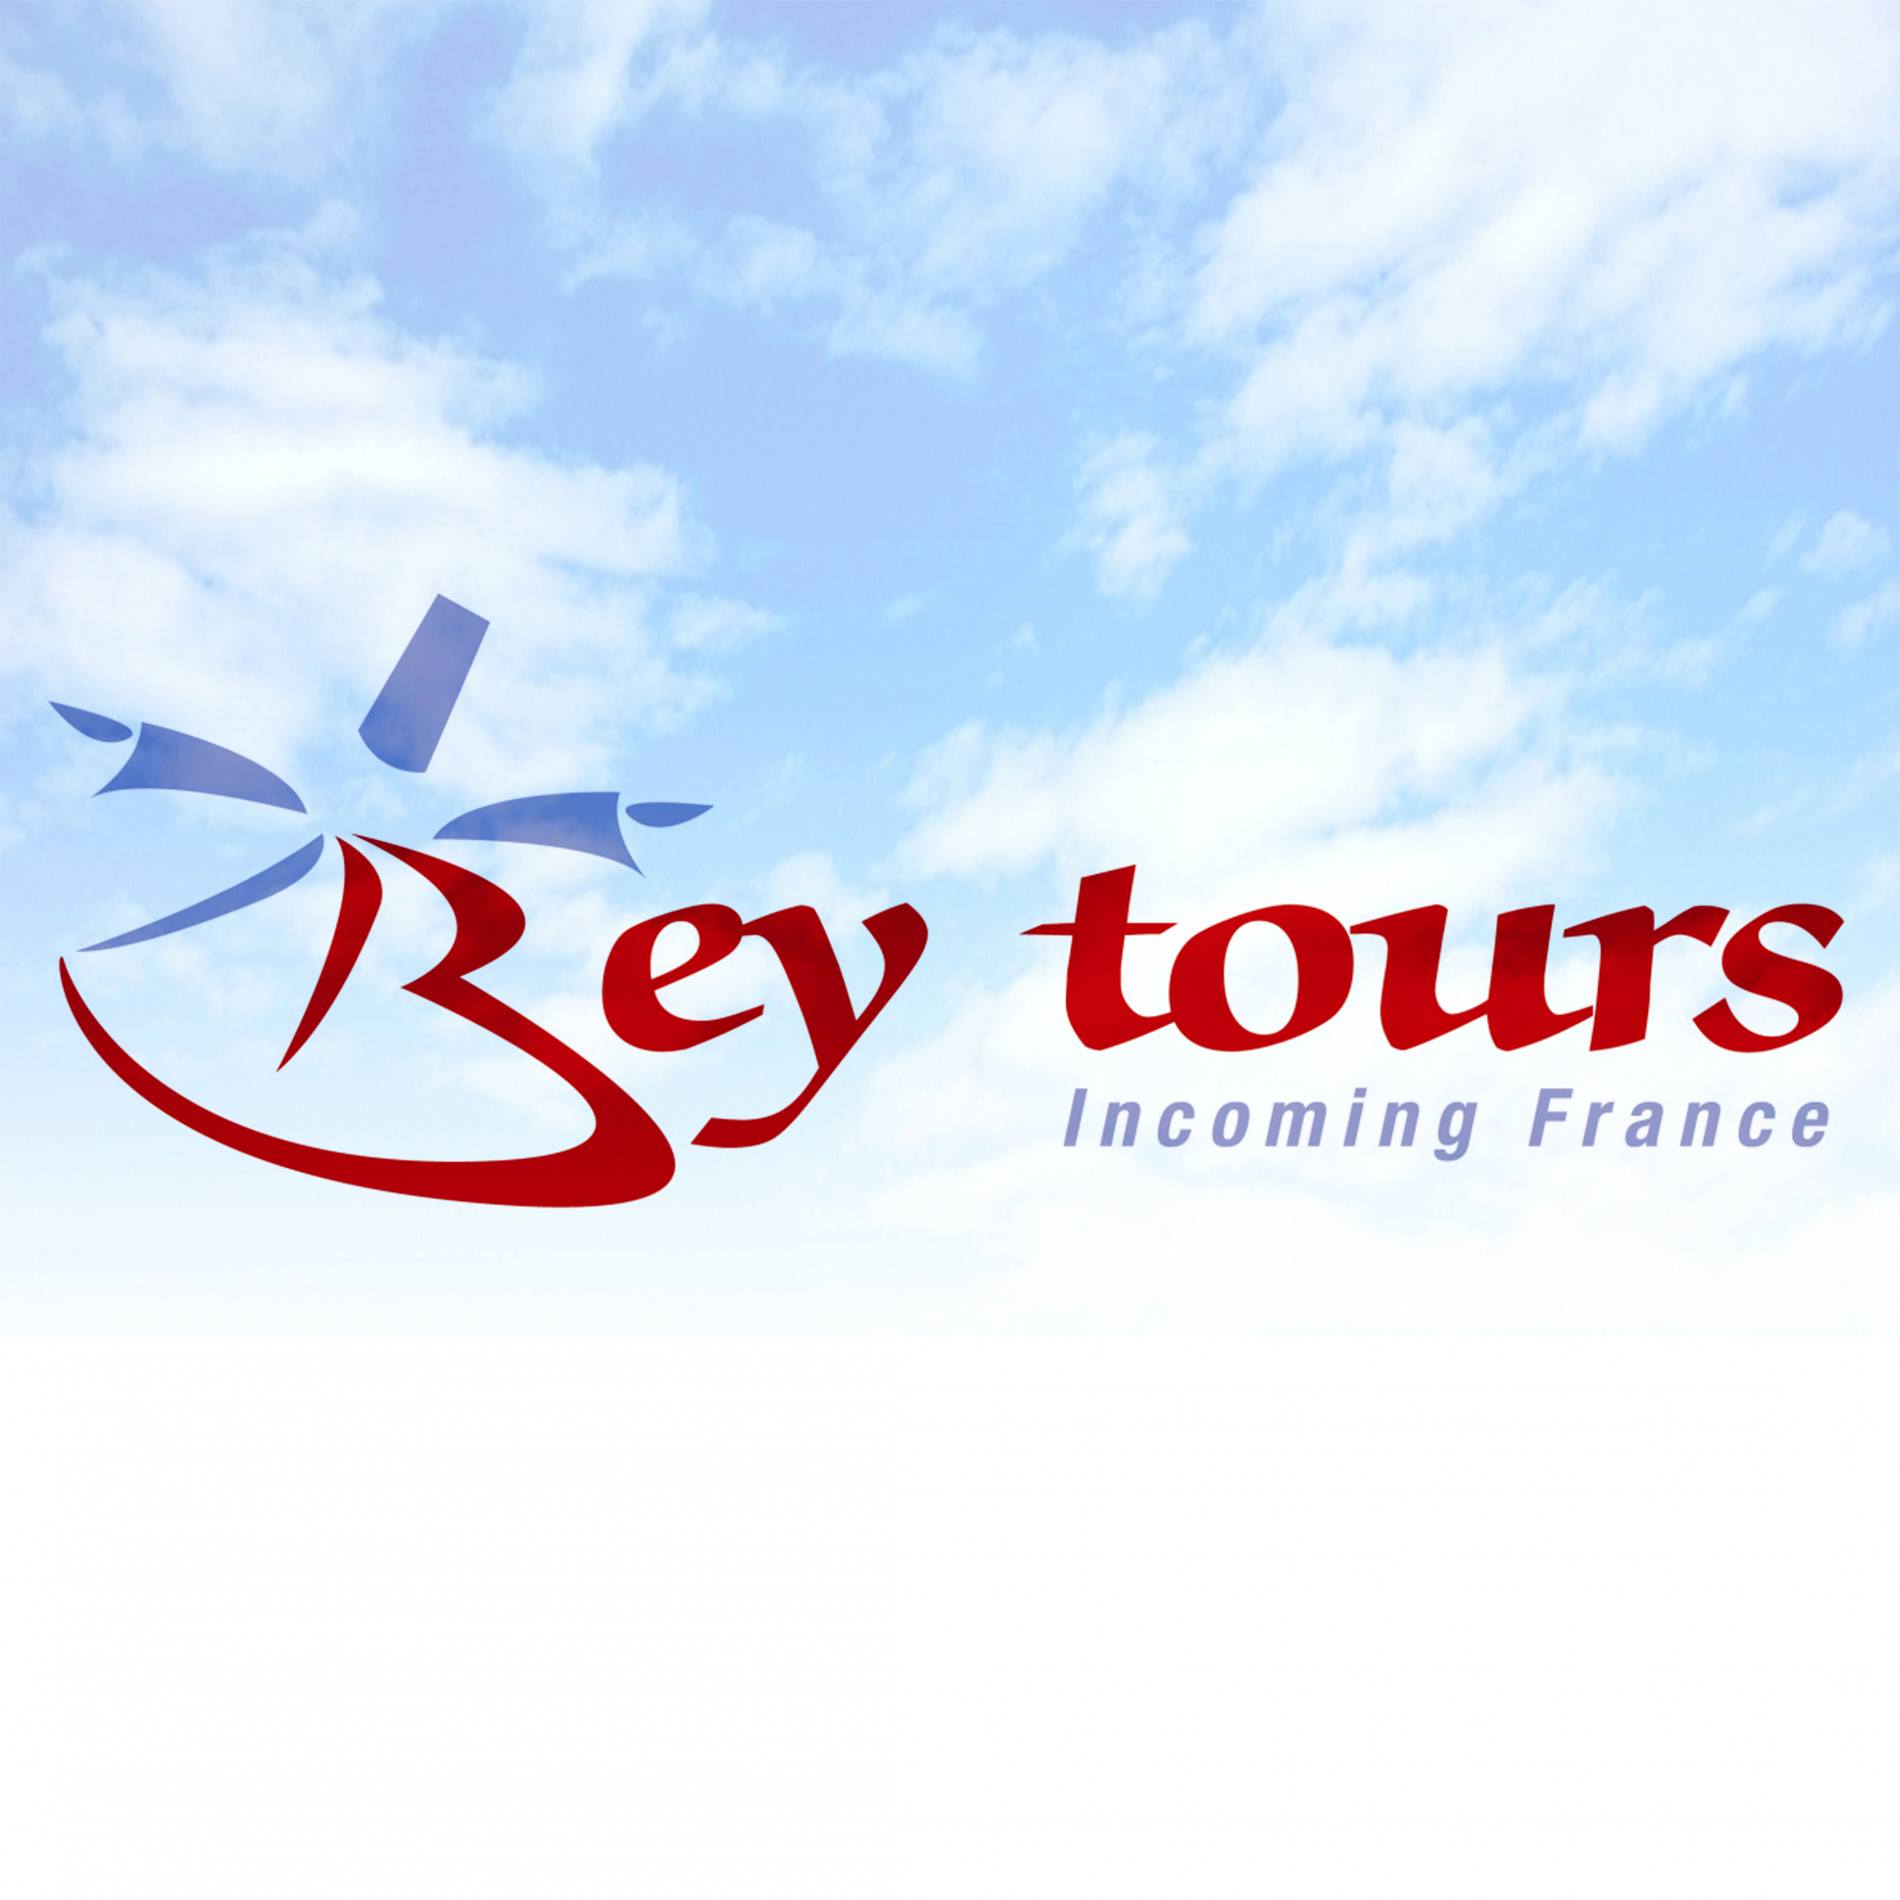 Bey Tours